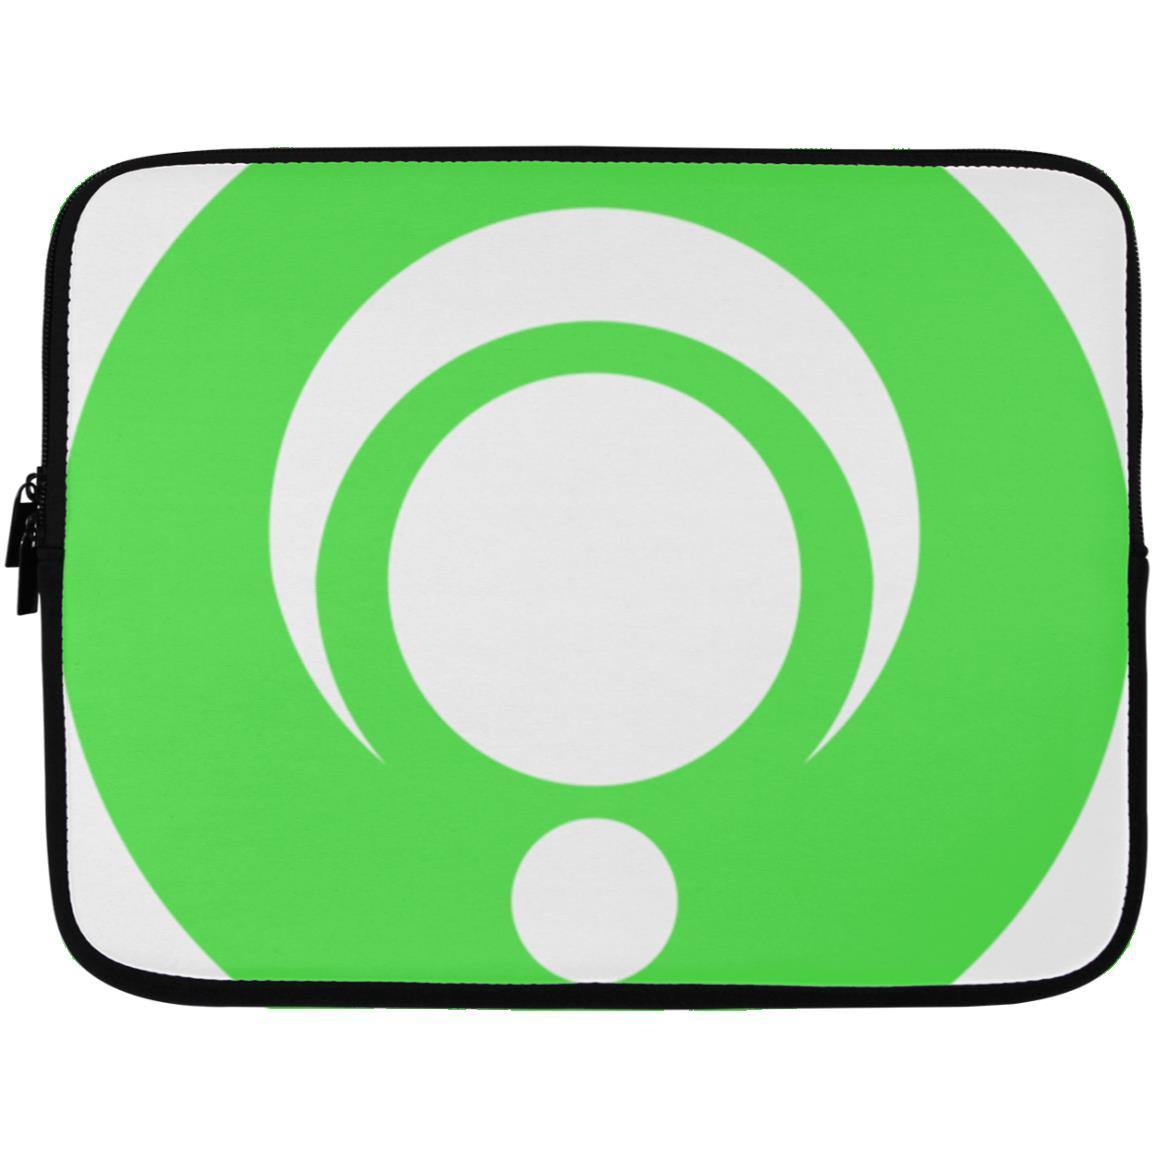 Crop Circle Laptop Sleeve - Cley Hill 3 - Shapes of Wisdom